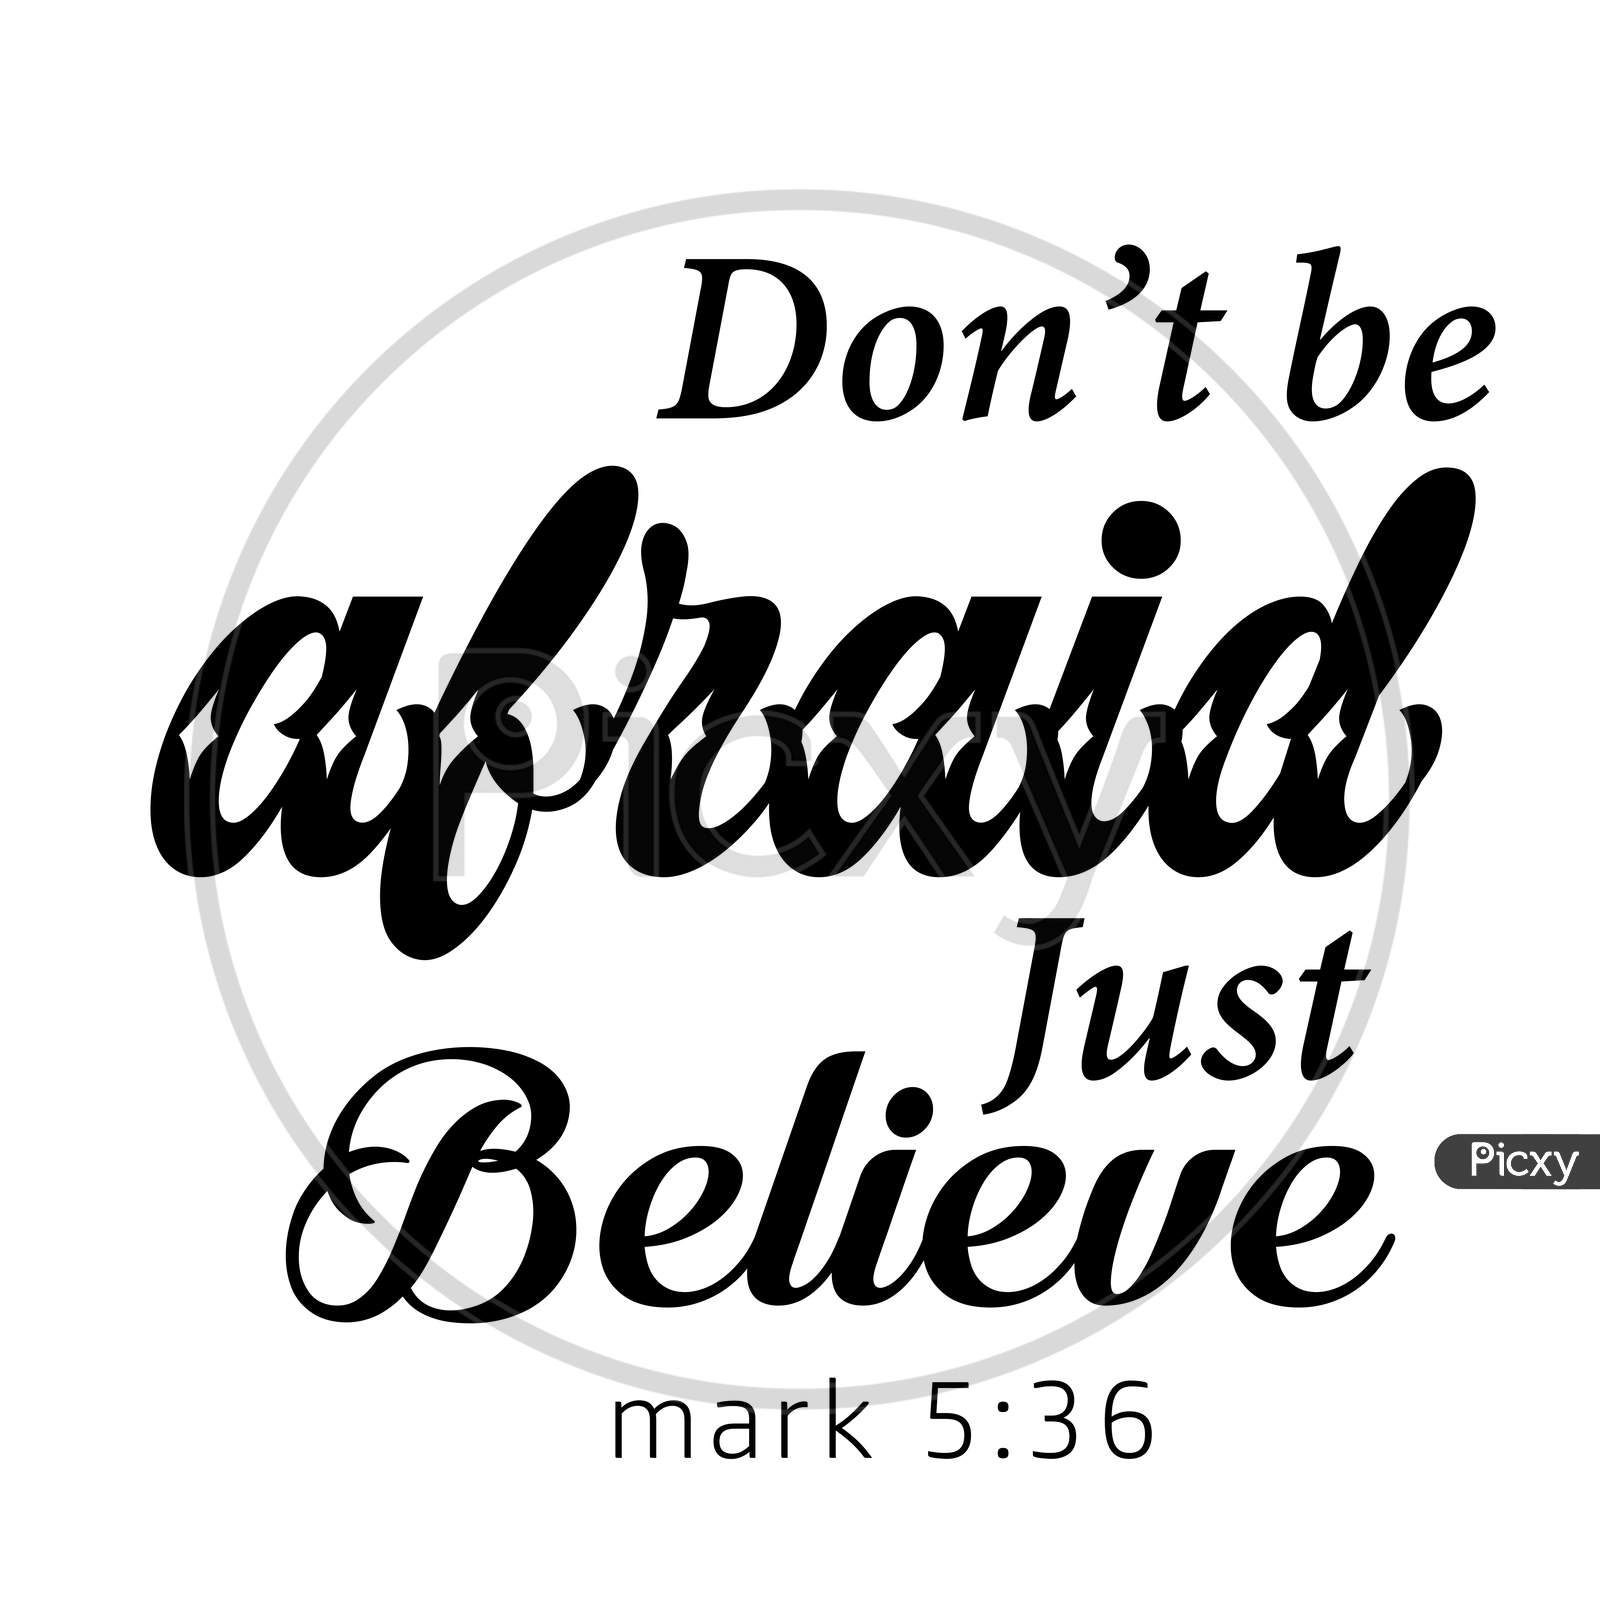 Biblical Phrase - Don't be afraid just believe